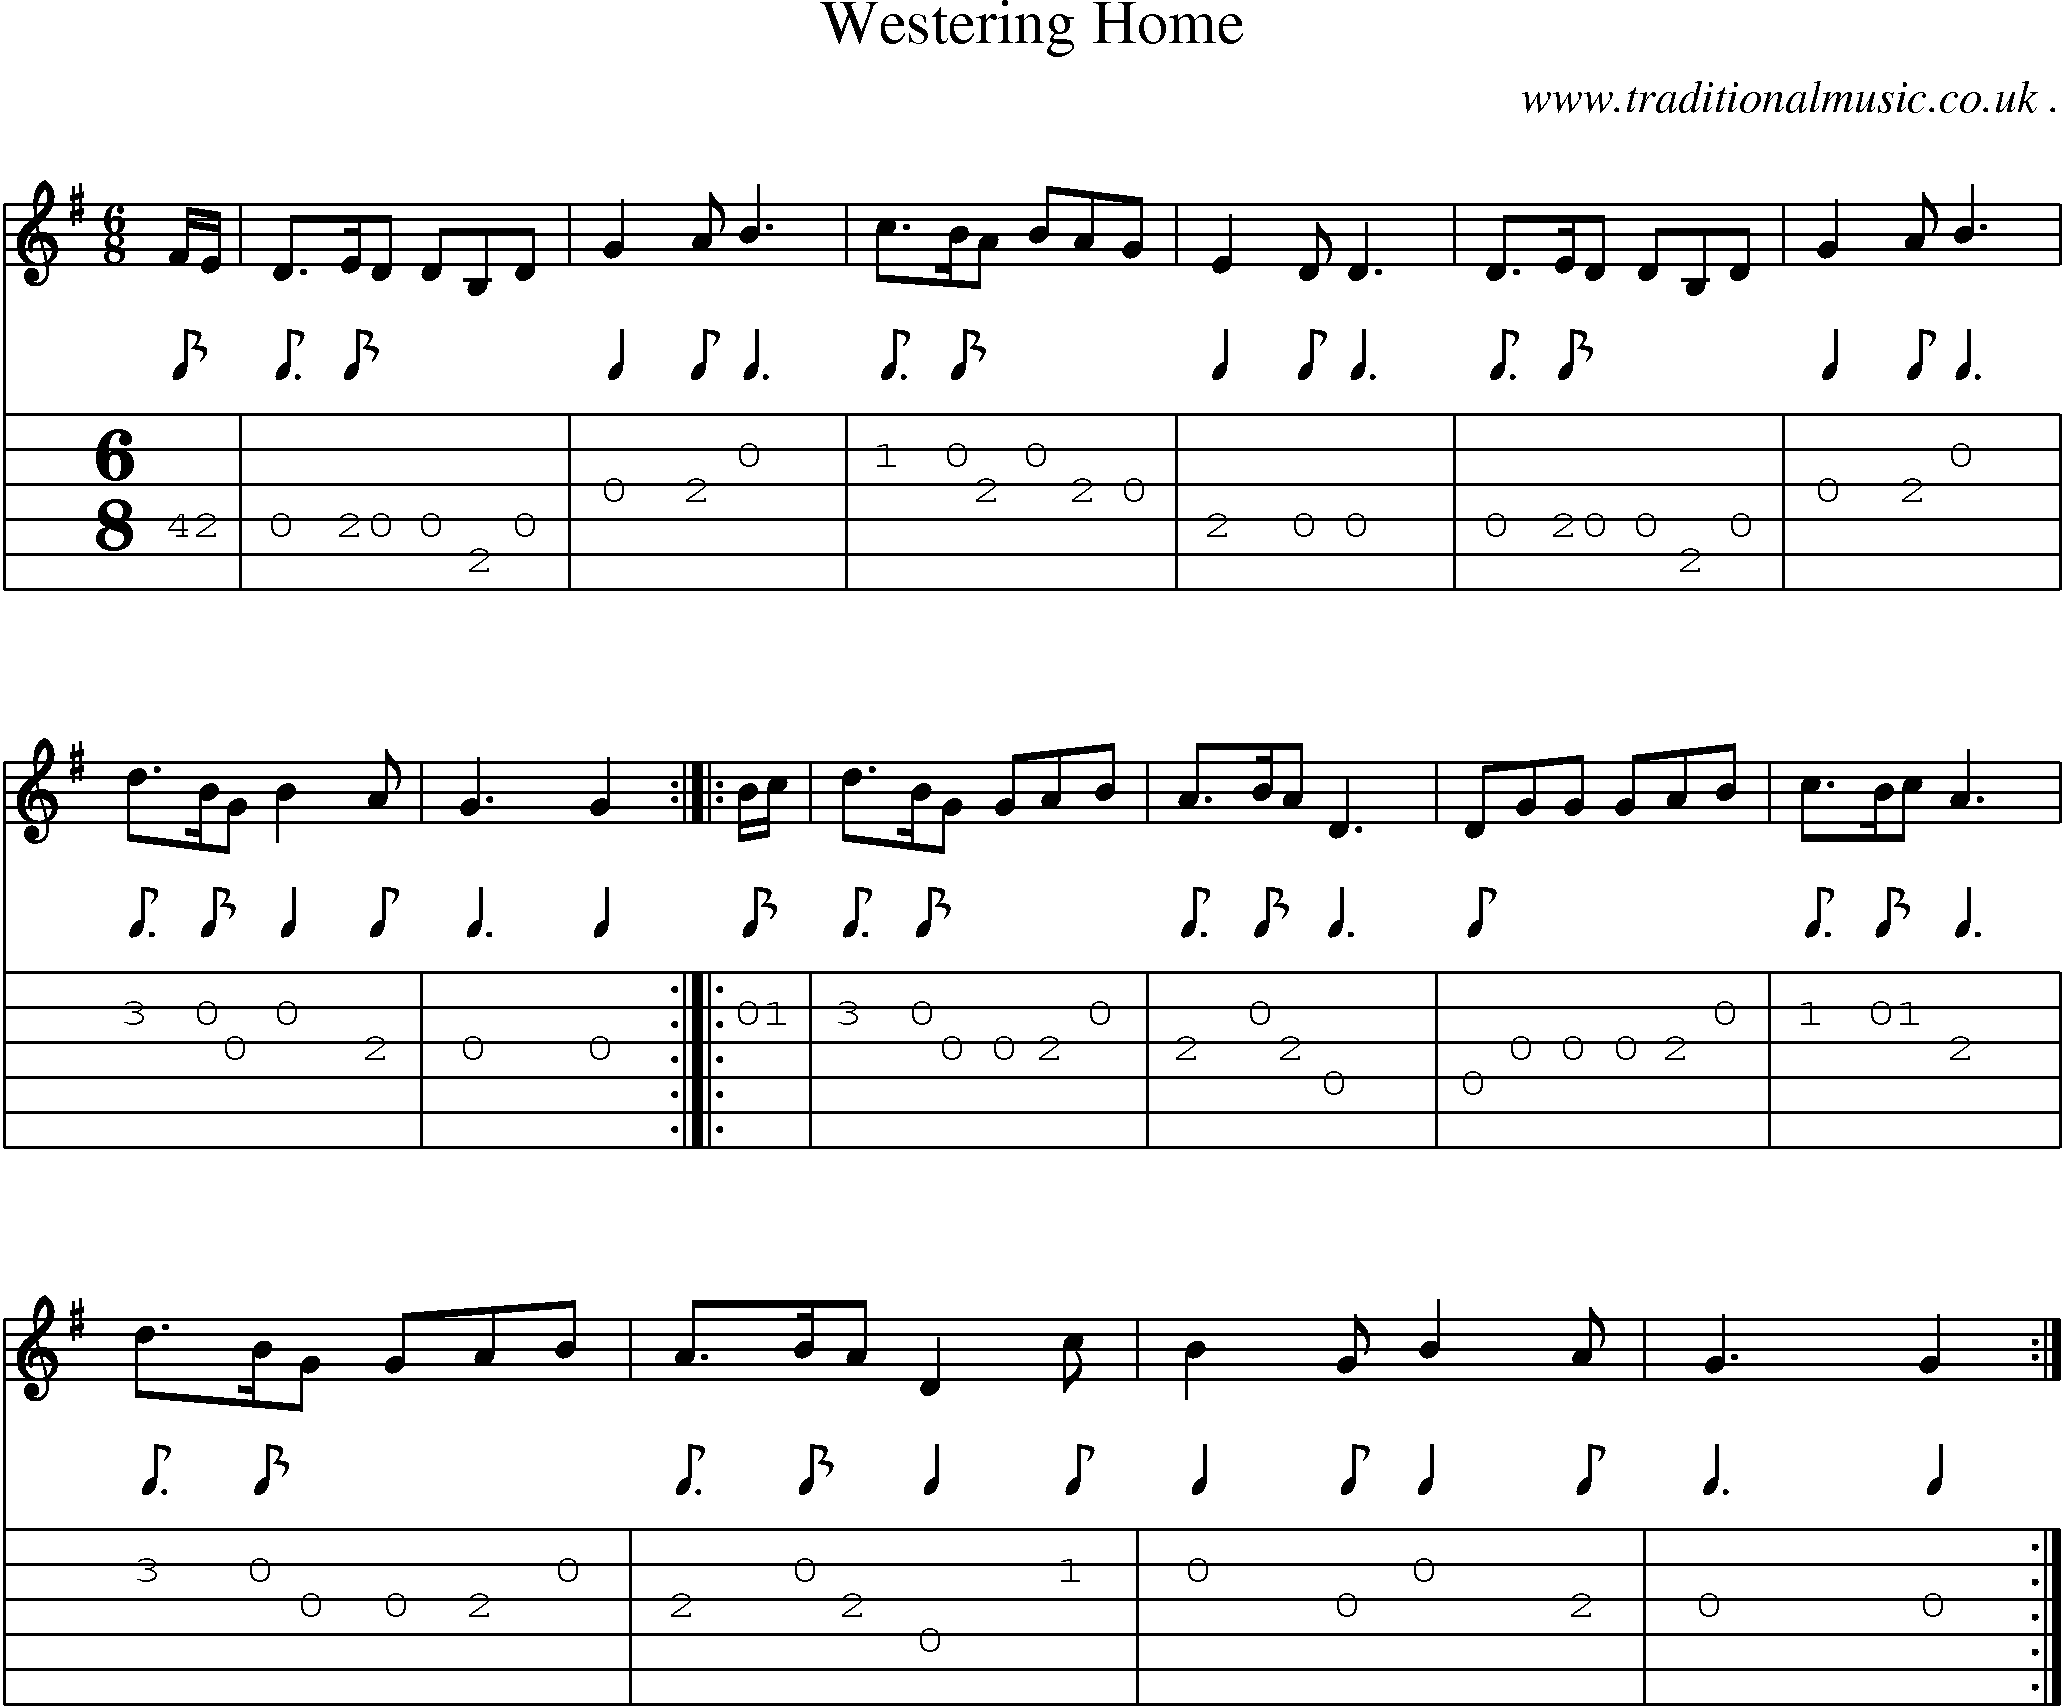 Sheet-music  score, Chords and Guitar Tabs for Westering Home